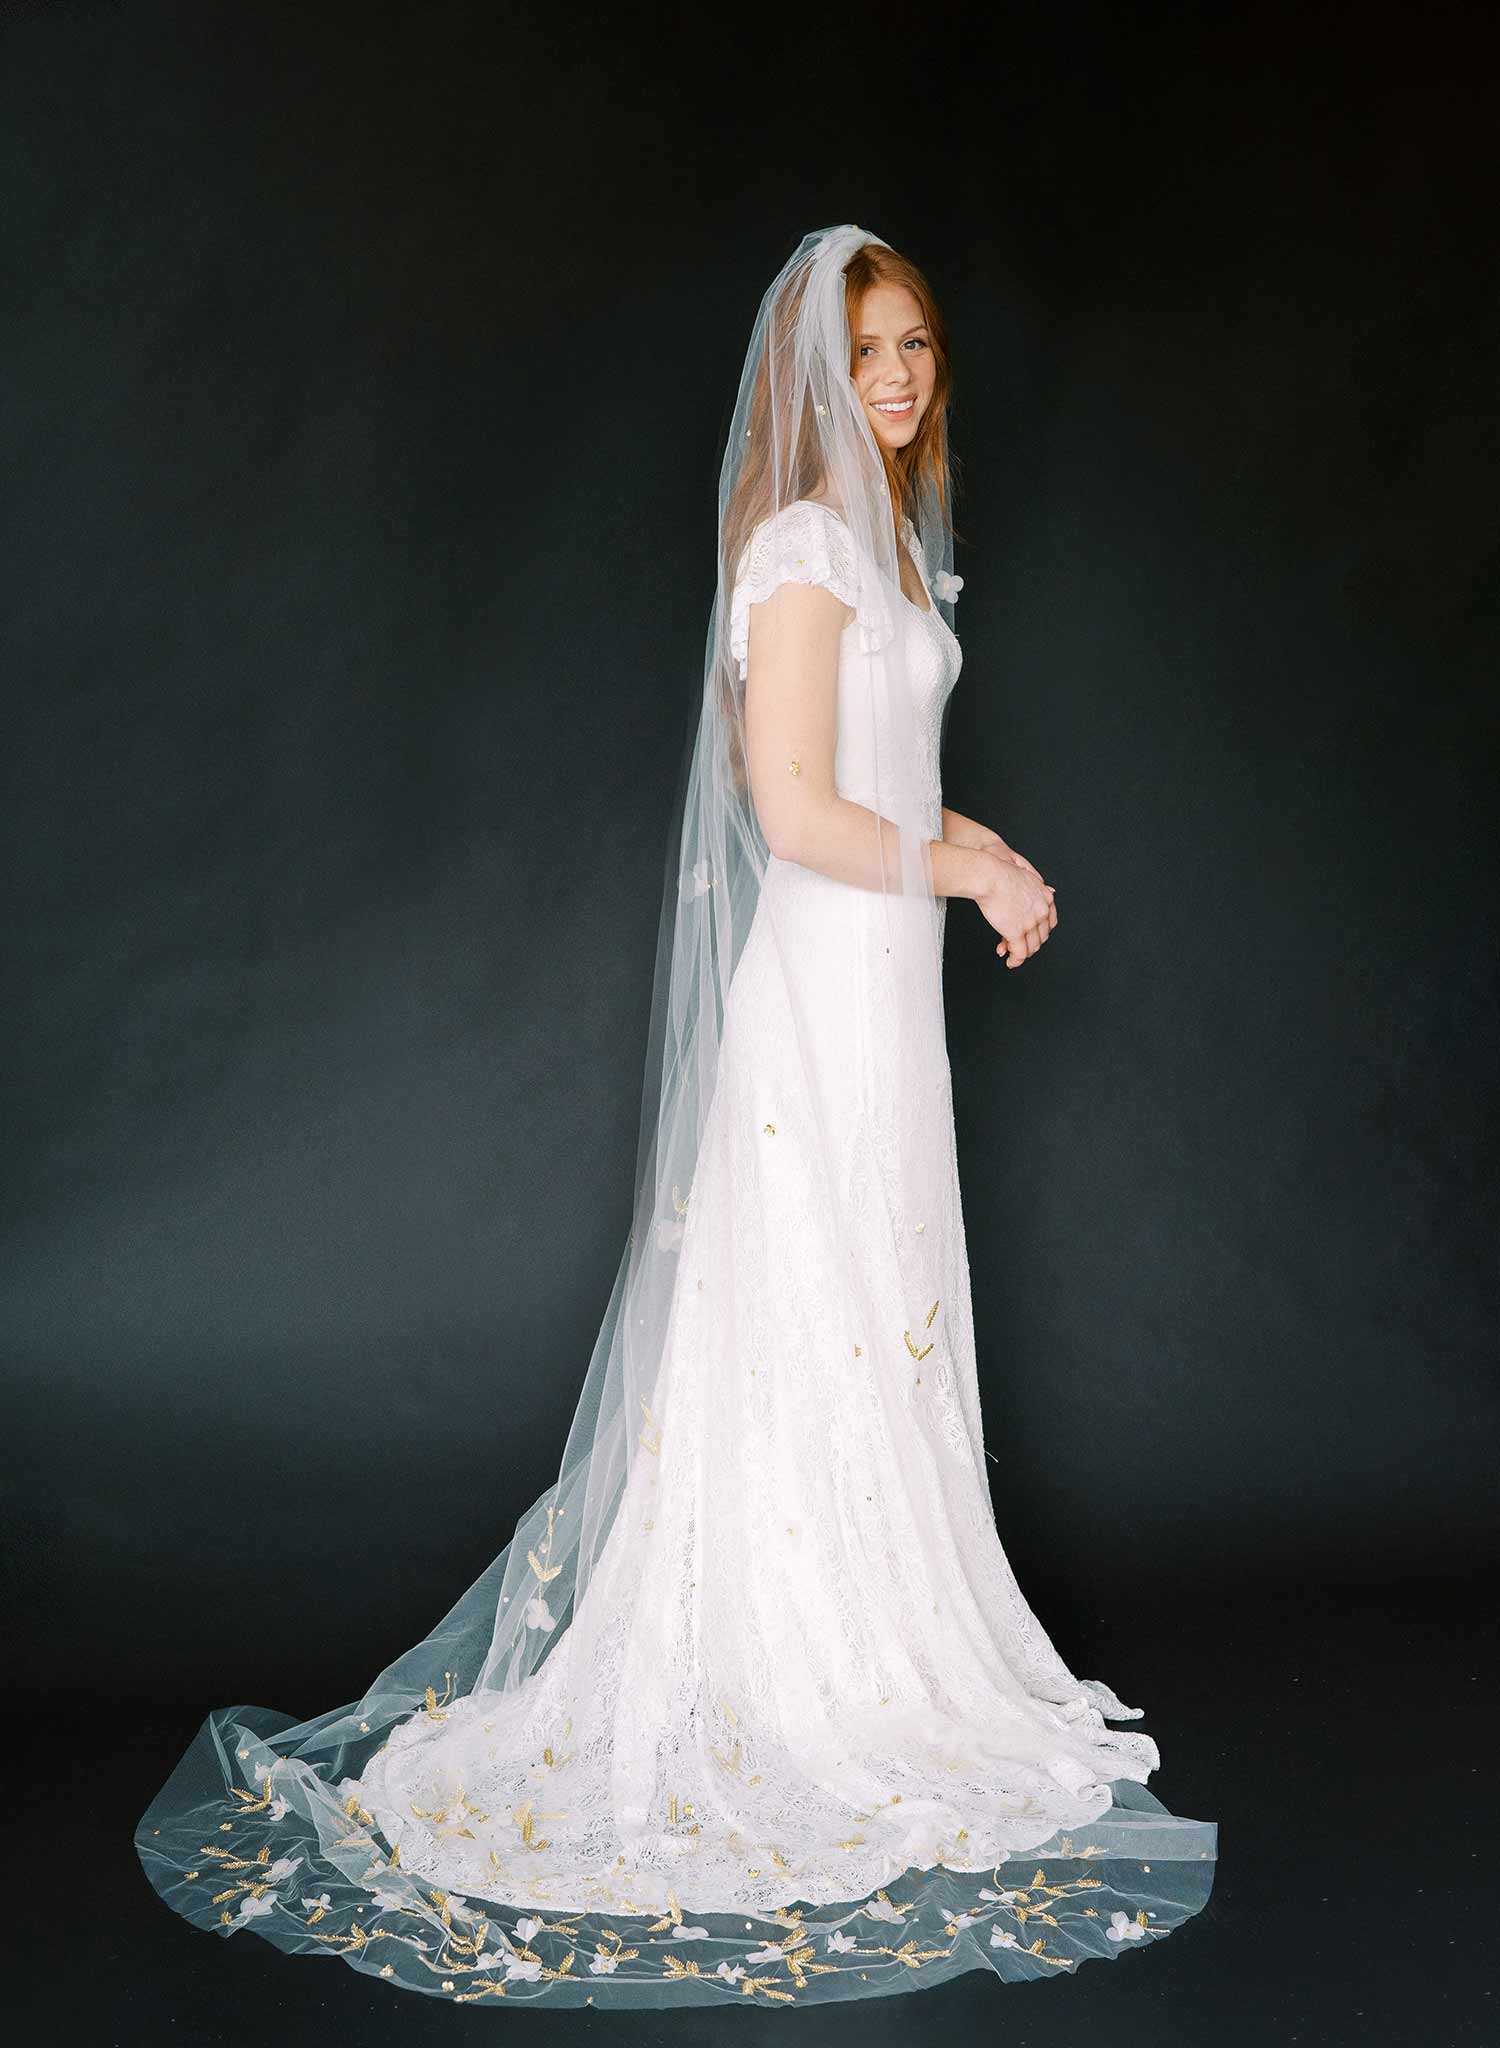 Twigs & Honey Pearl Bridal Veil - Pearl Chapel Train Veil - Style #968 Cathedral (108)